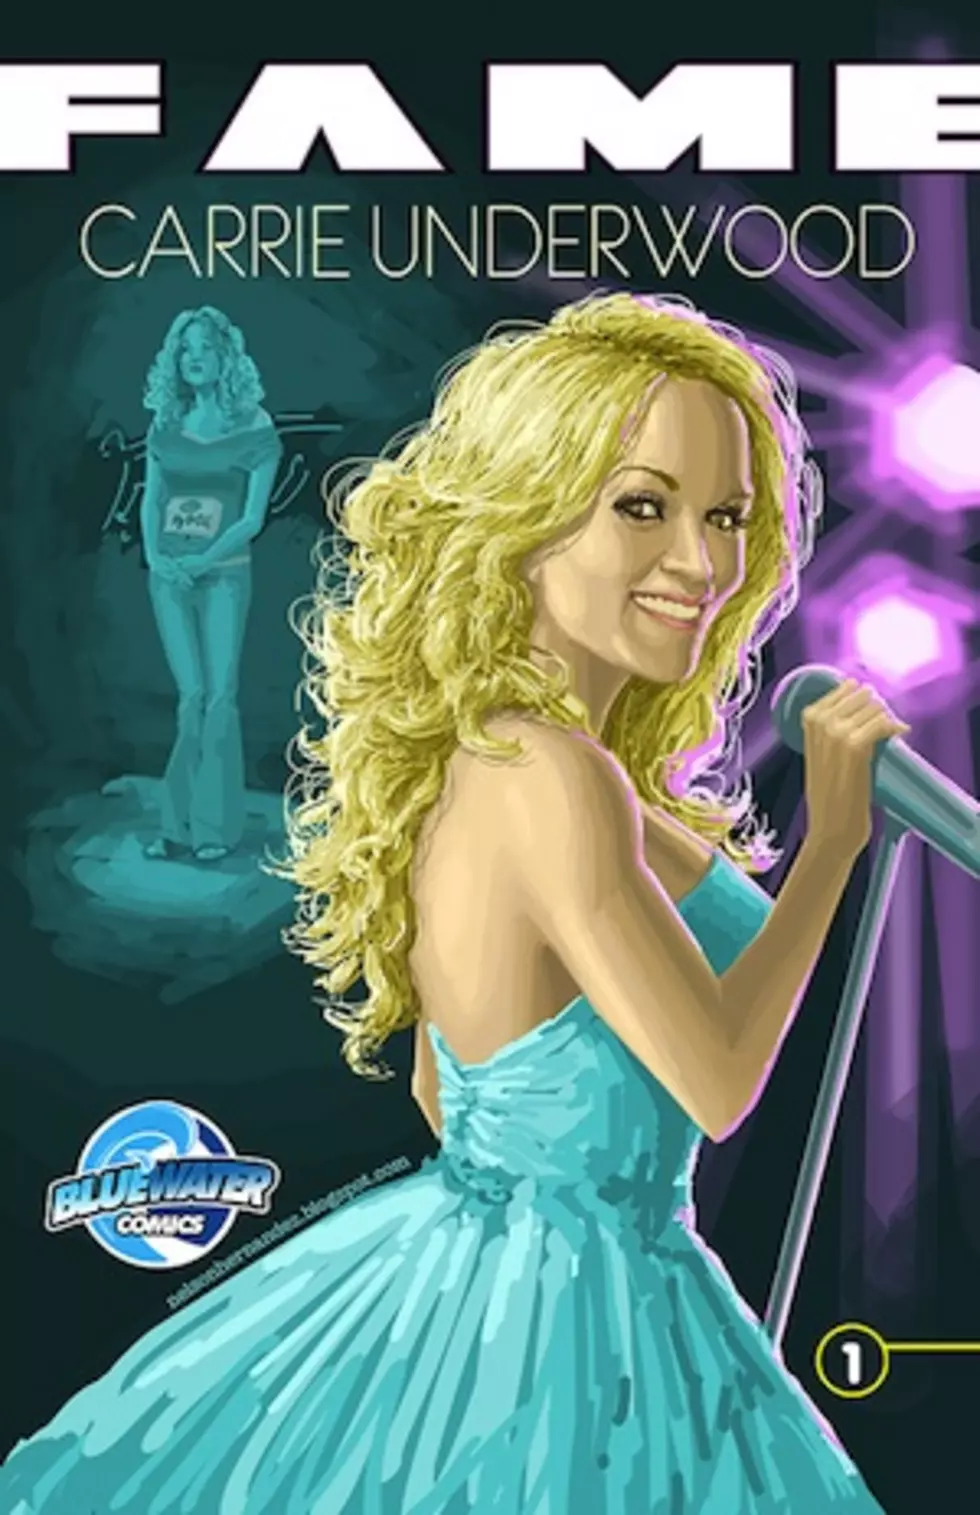 Carrie Underwood&#8217;s Life Story Gets the Comic Book Treatment